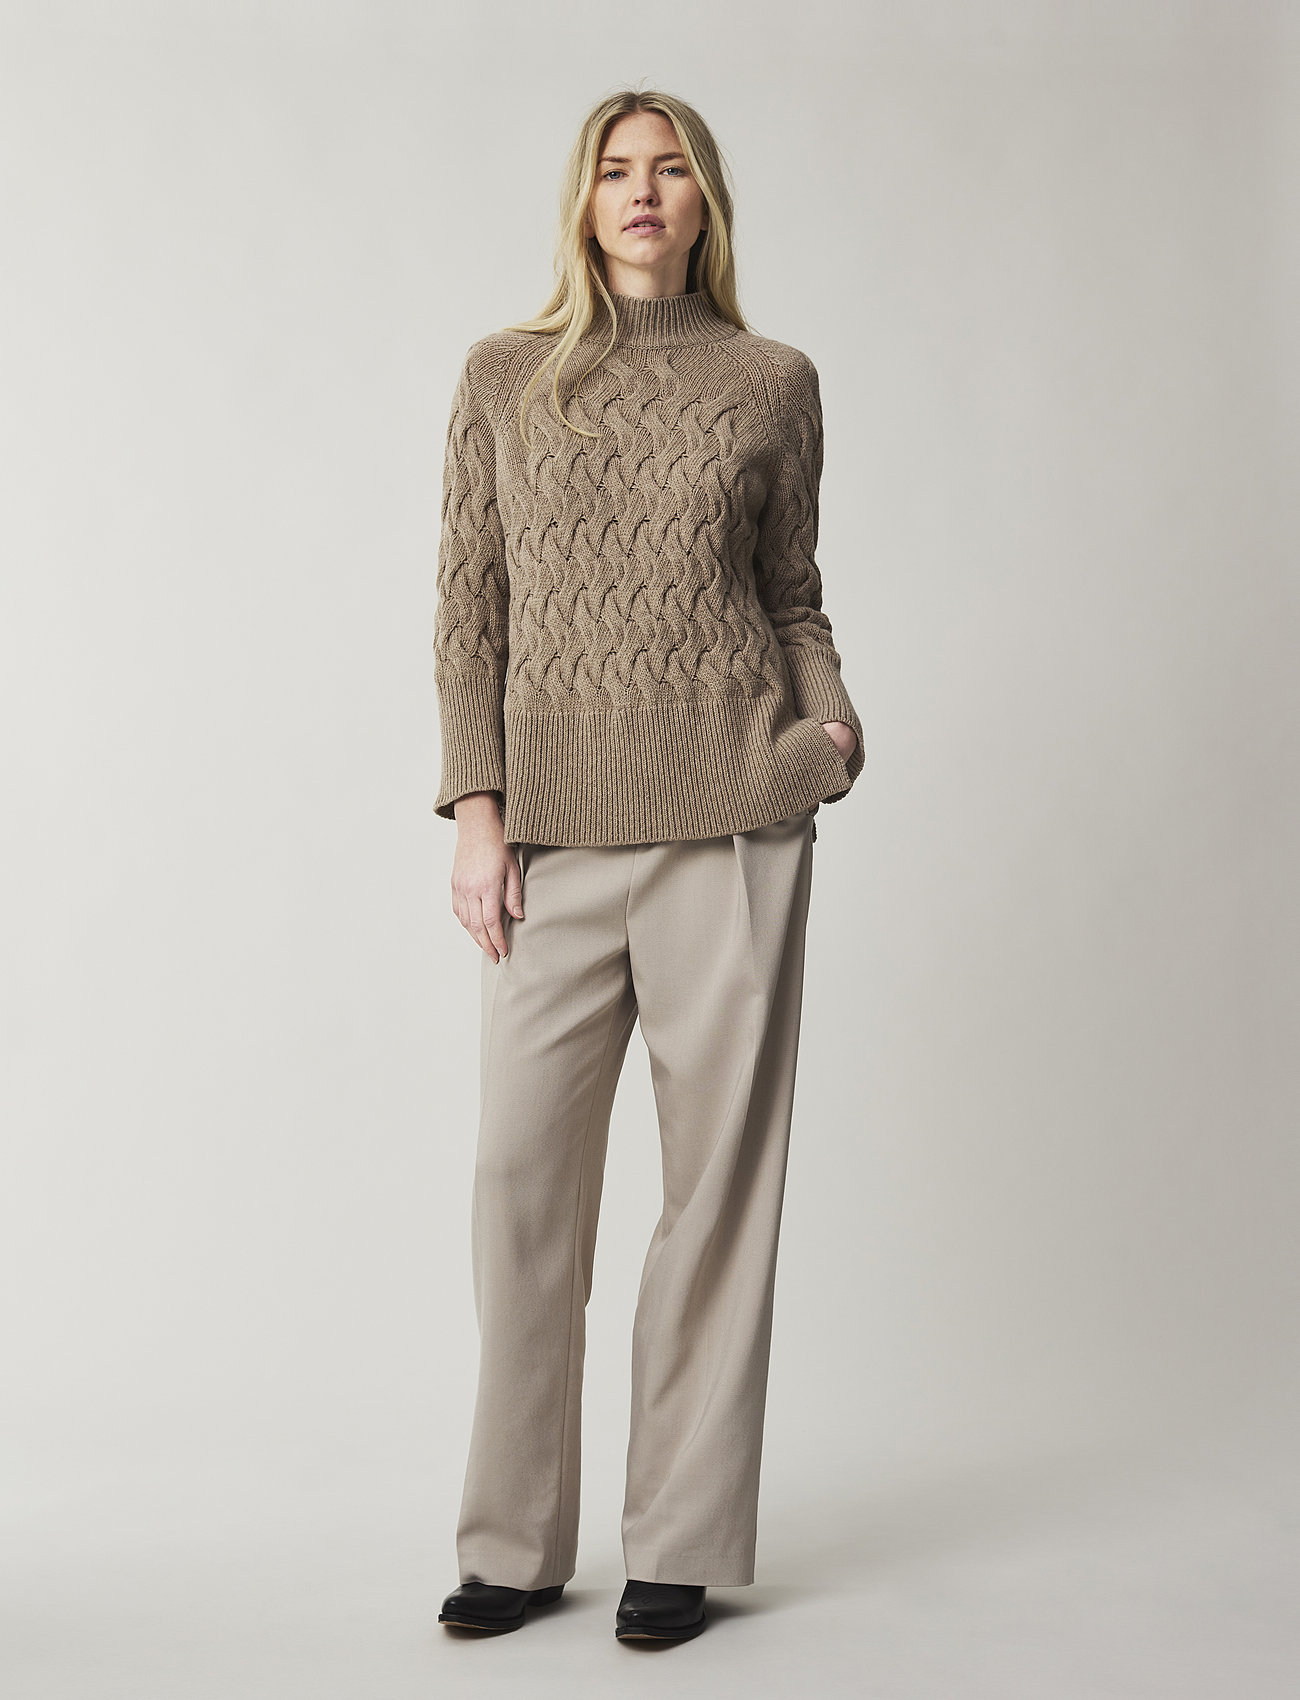 Lexington Clothing - Elisabeth Recycled Wool Mock Neck Sweater - pullover - light brown - 1